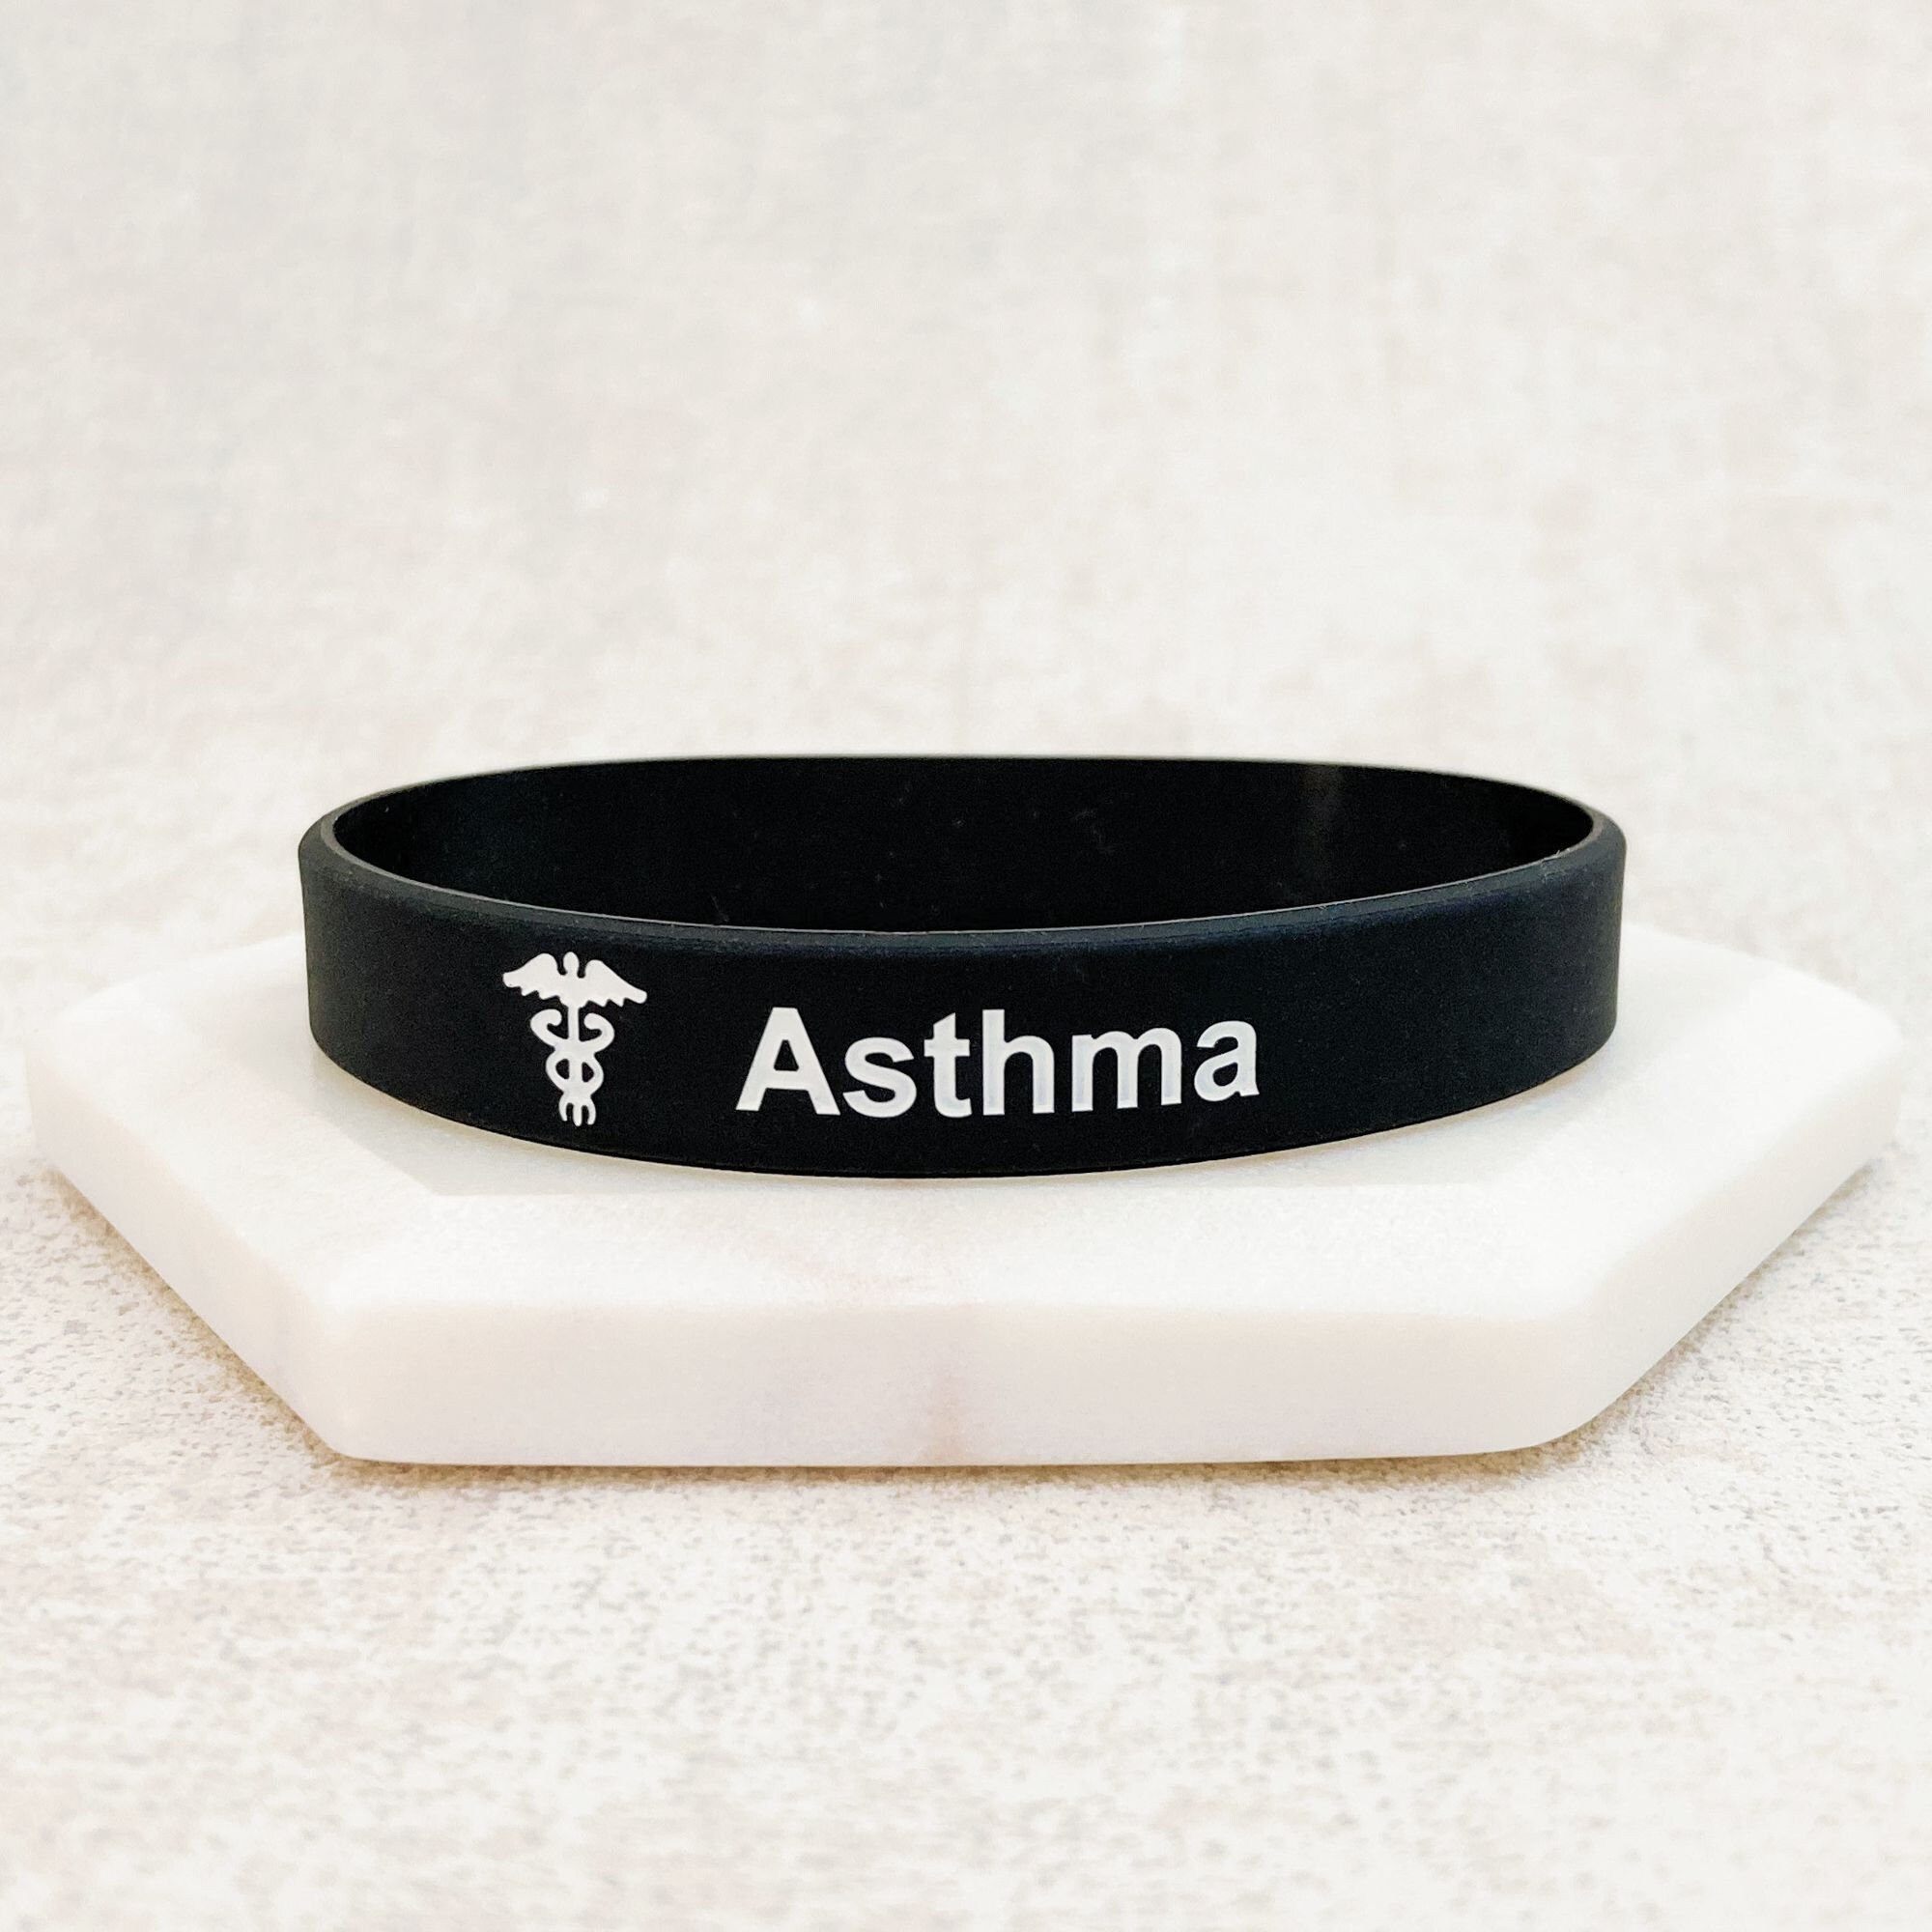 Lyndong 4 Pack Asthma Silicone Medical Alert Emergency Bracelet Wristbands ( Asthma) : Amazon.ca: Clothing, Shoes & Accessories